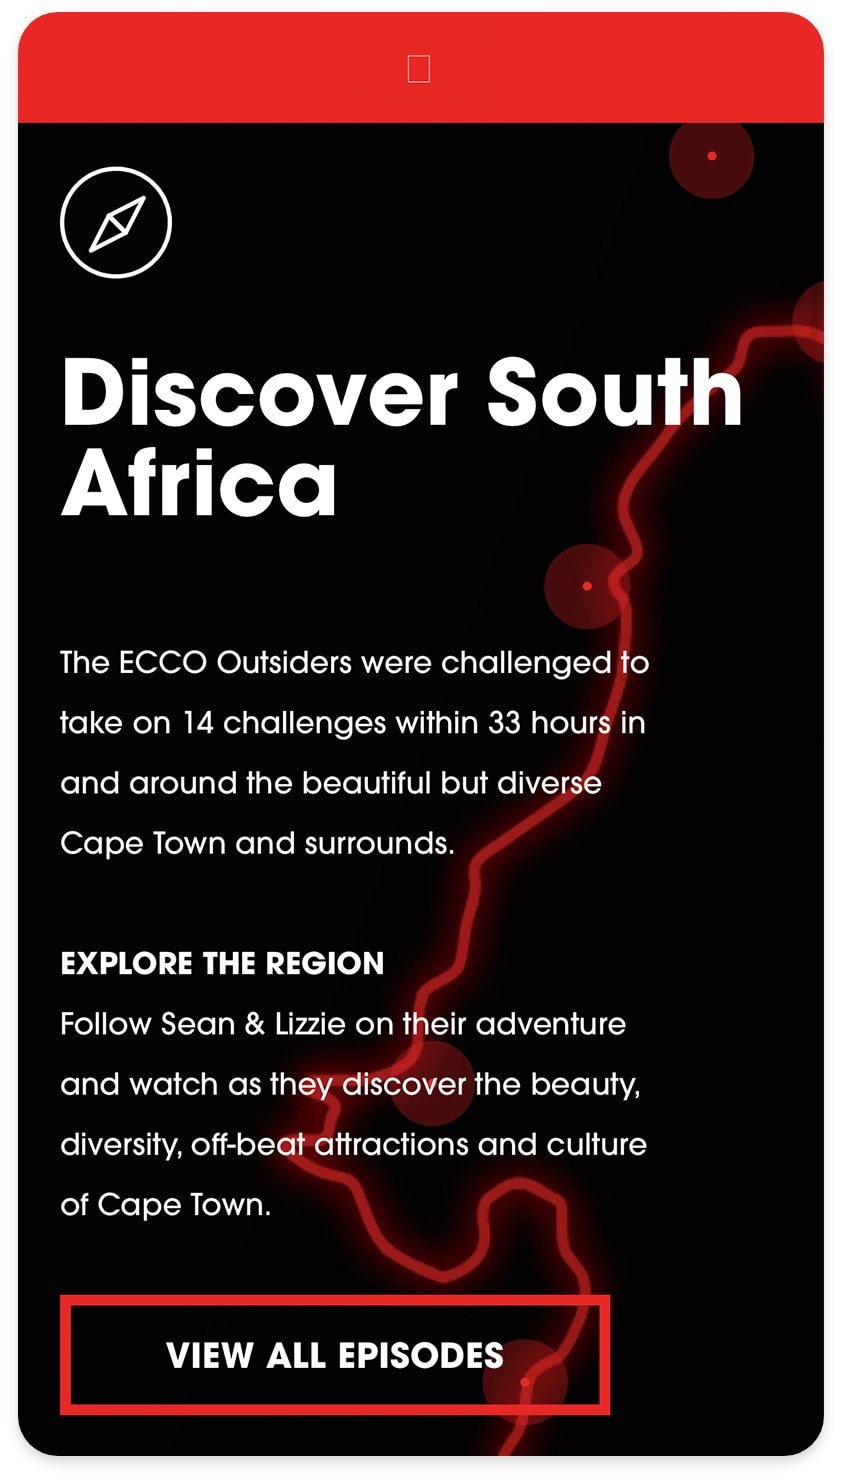 "Discover South Africa" graphic with red and black design 